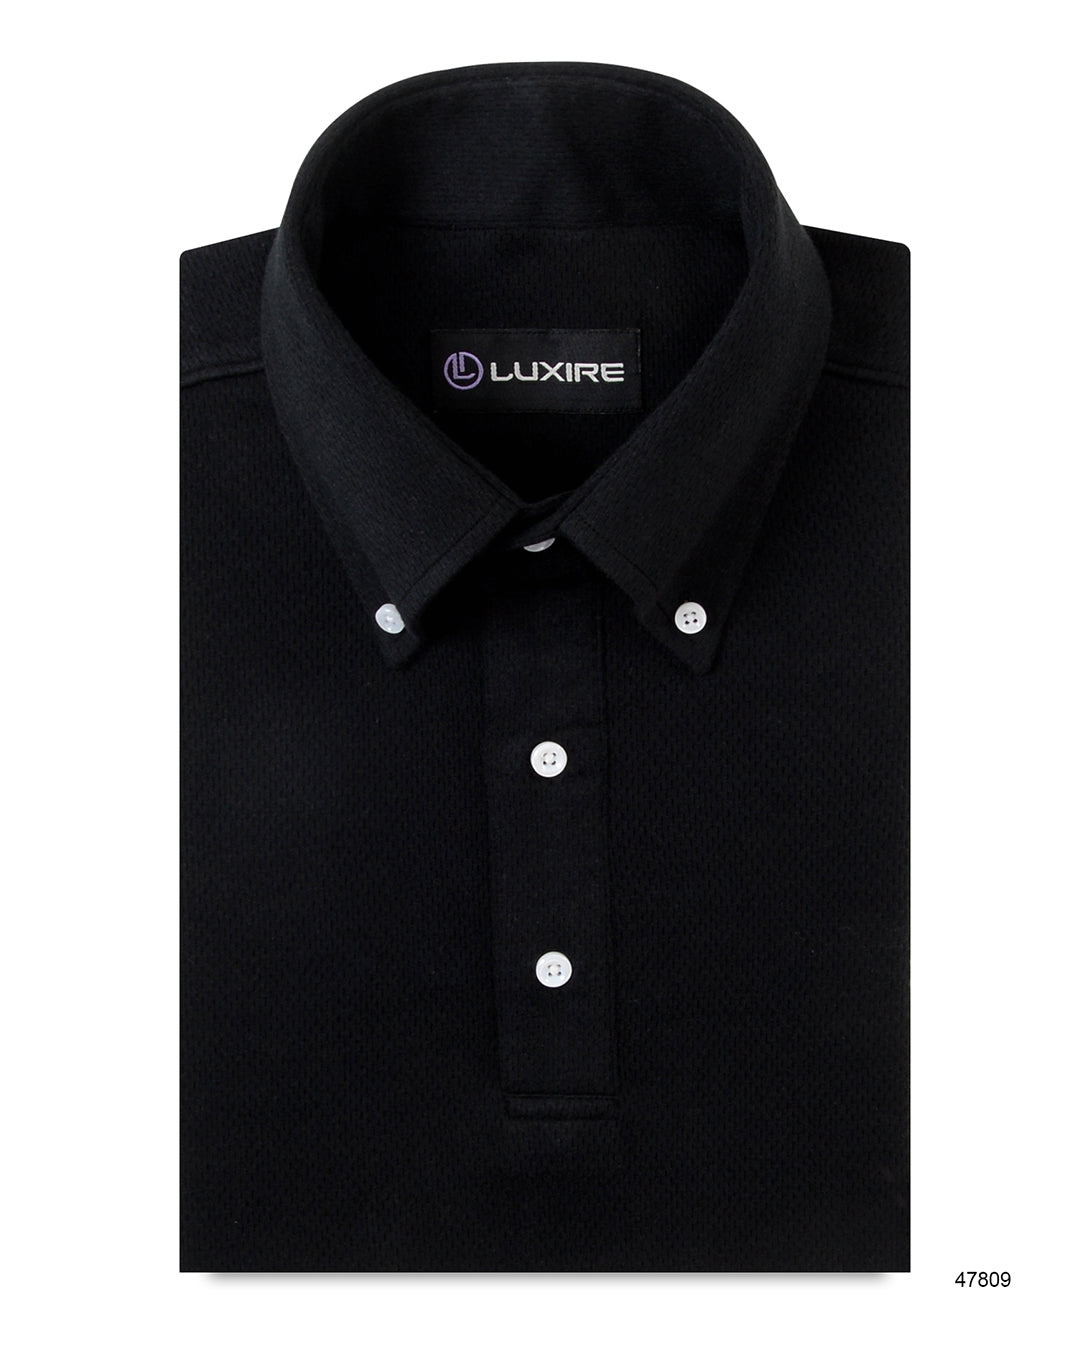 Front of the custom oxford polo shirt for men by Luxire in midnight black